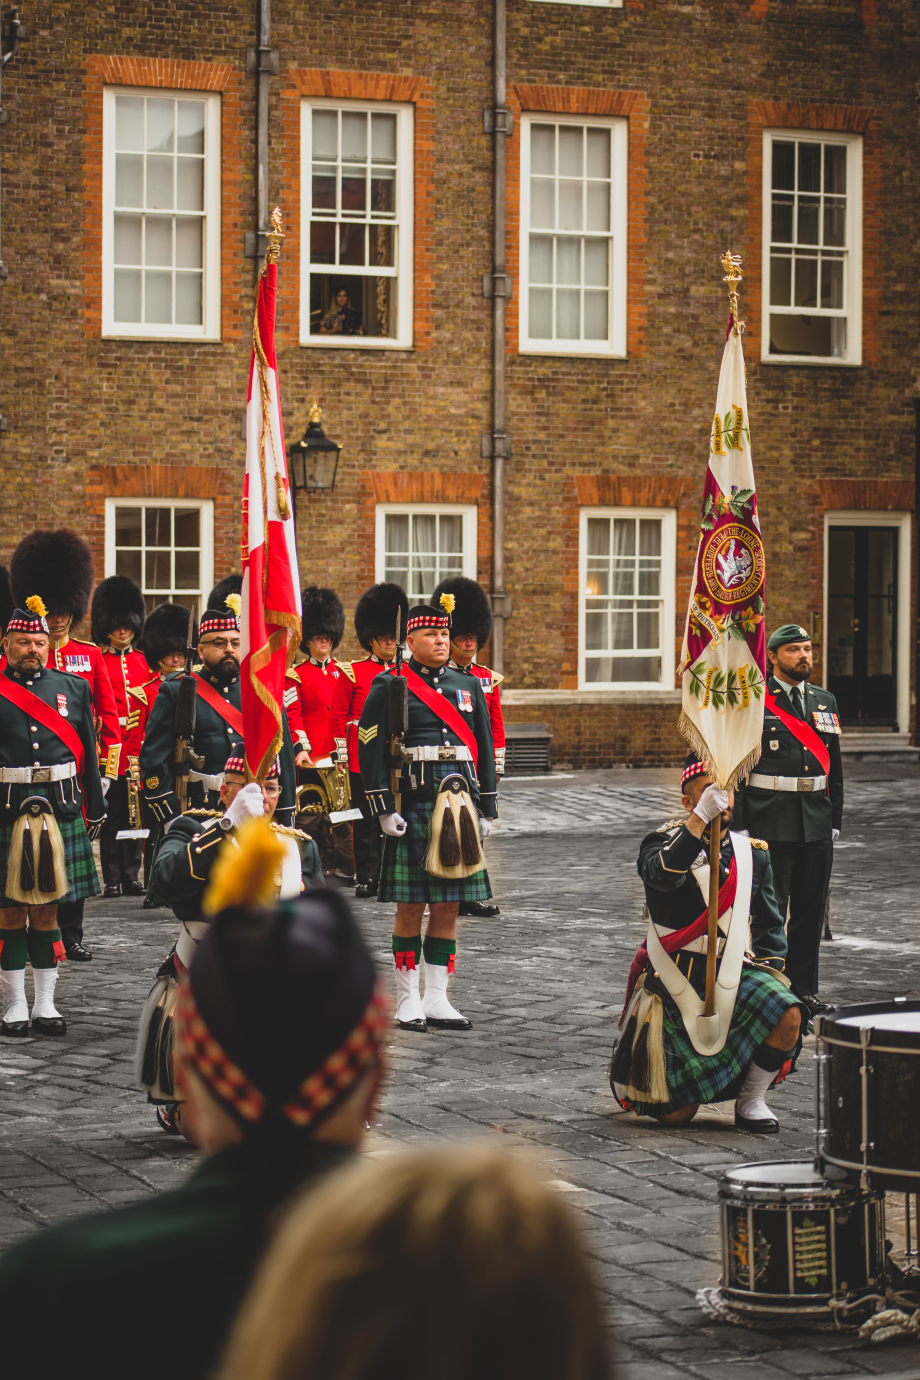 A Drumhead Service takes place in Colour Court, St James’s Palace